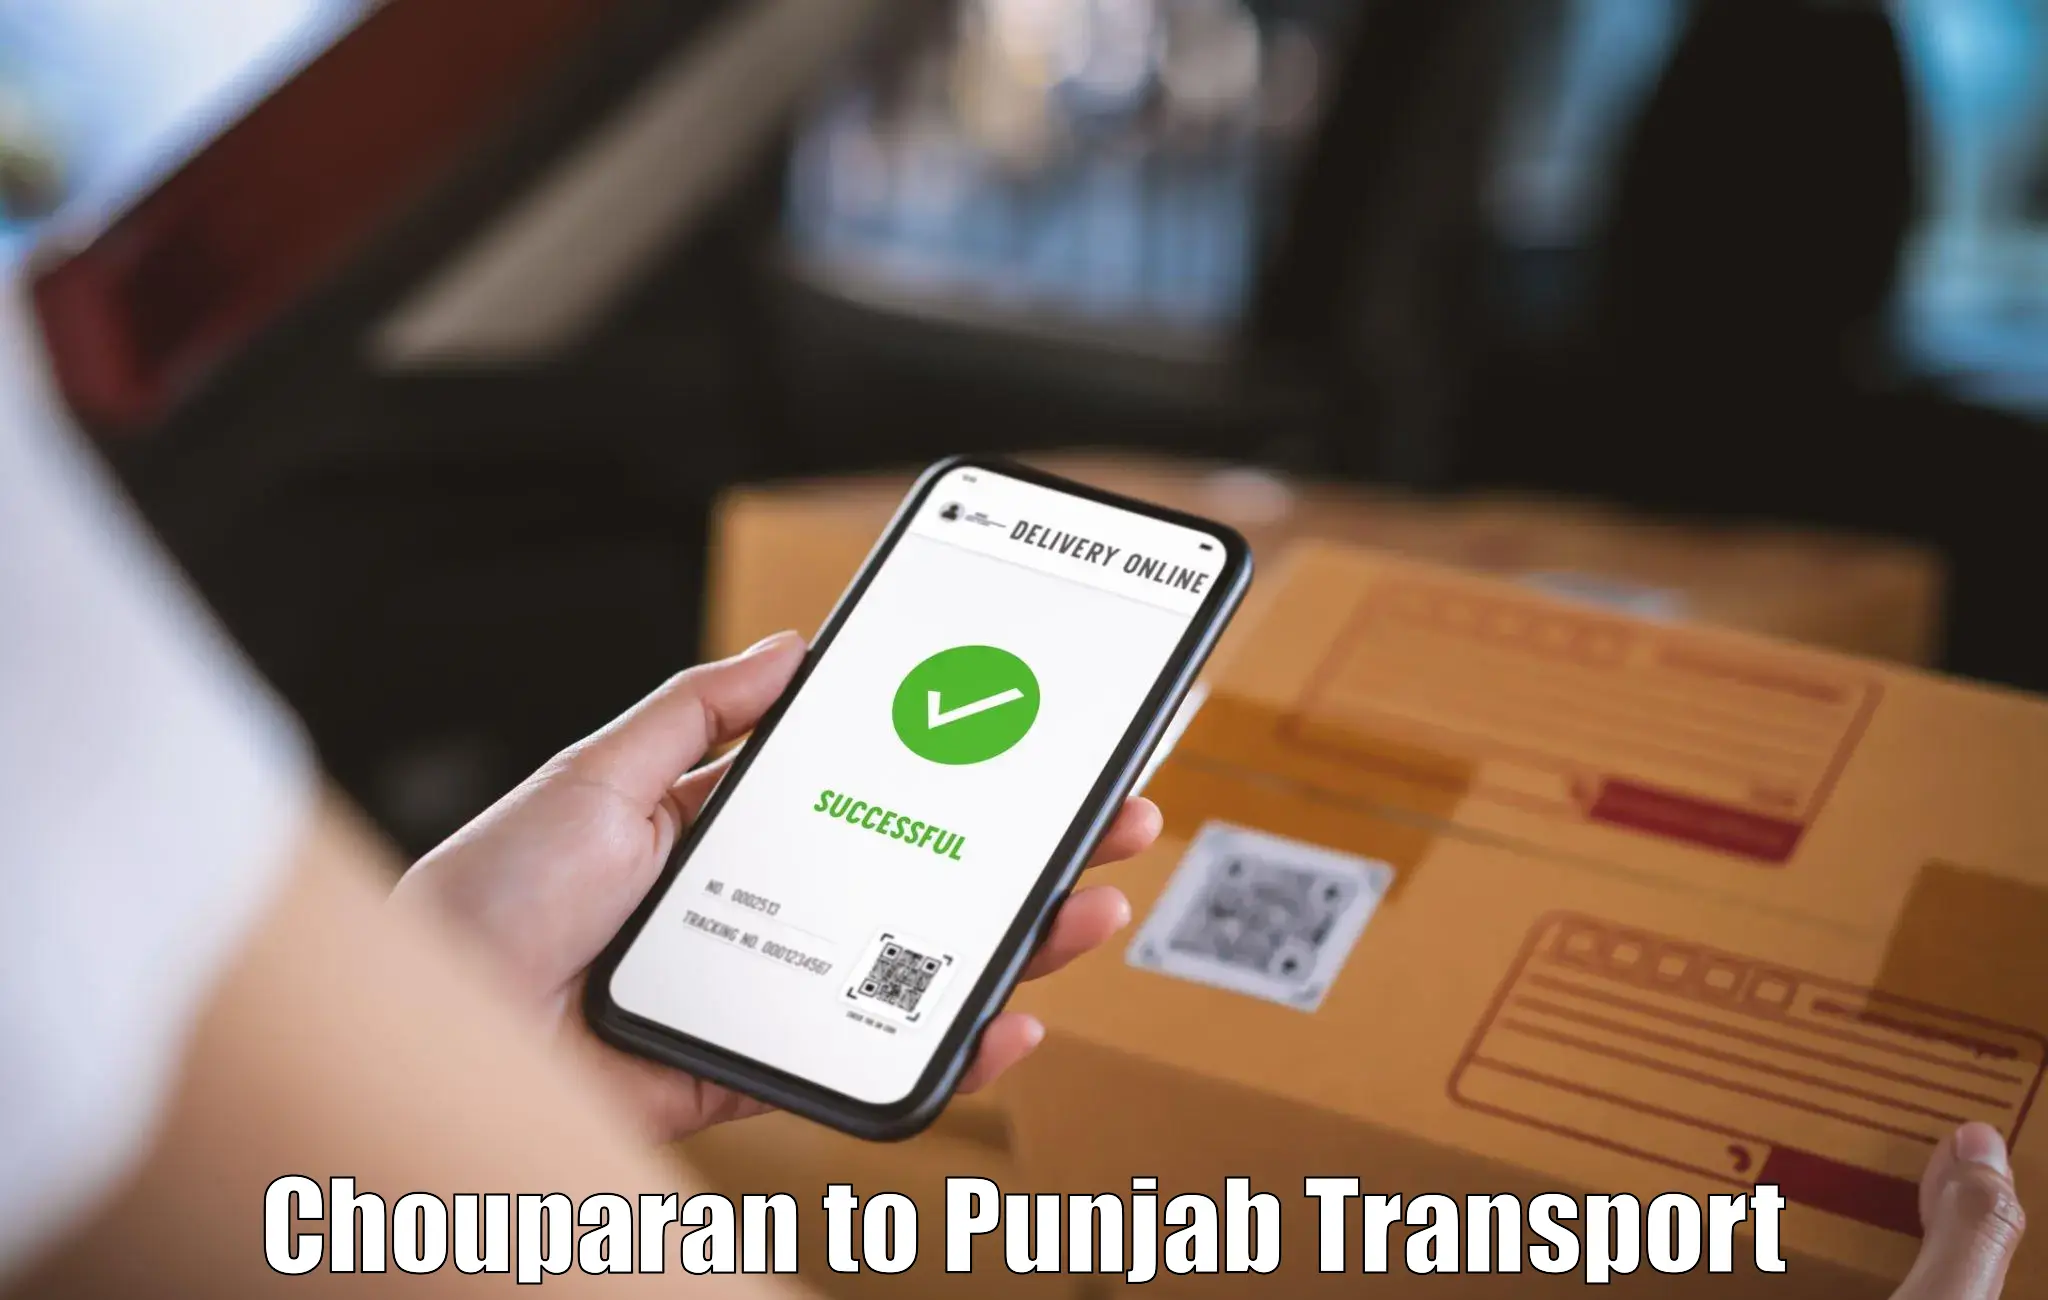 Daily transport service Chouparan to Patiala